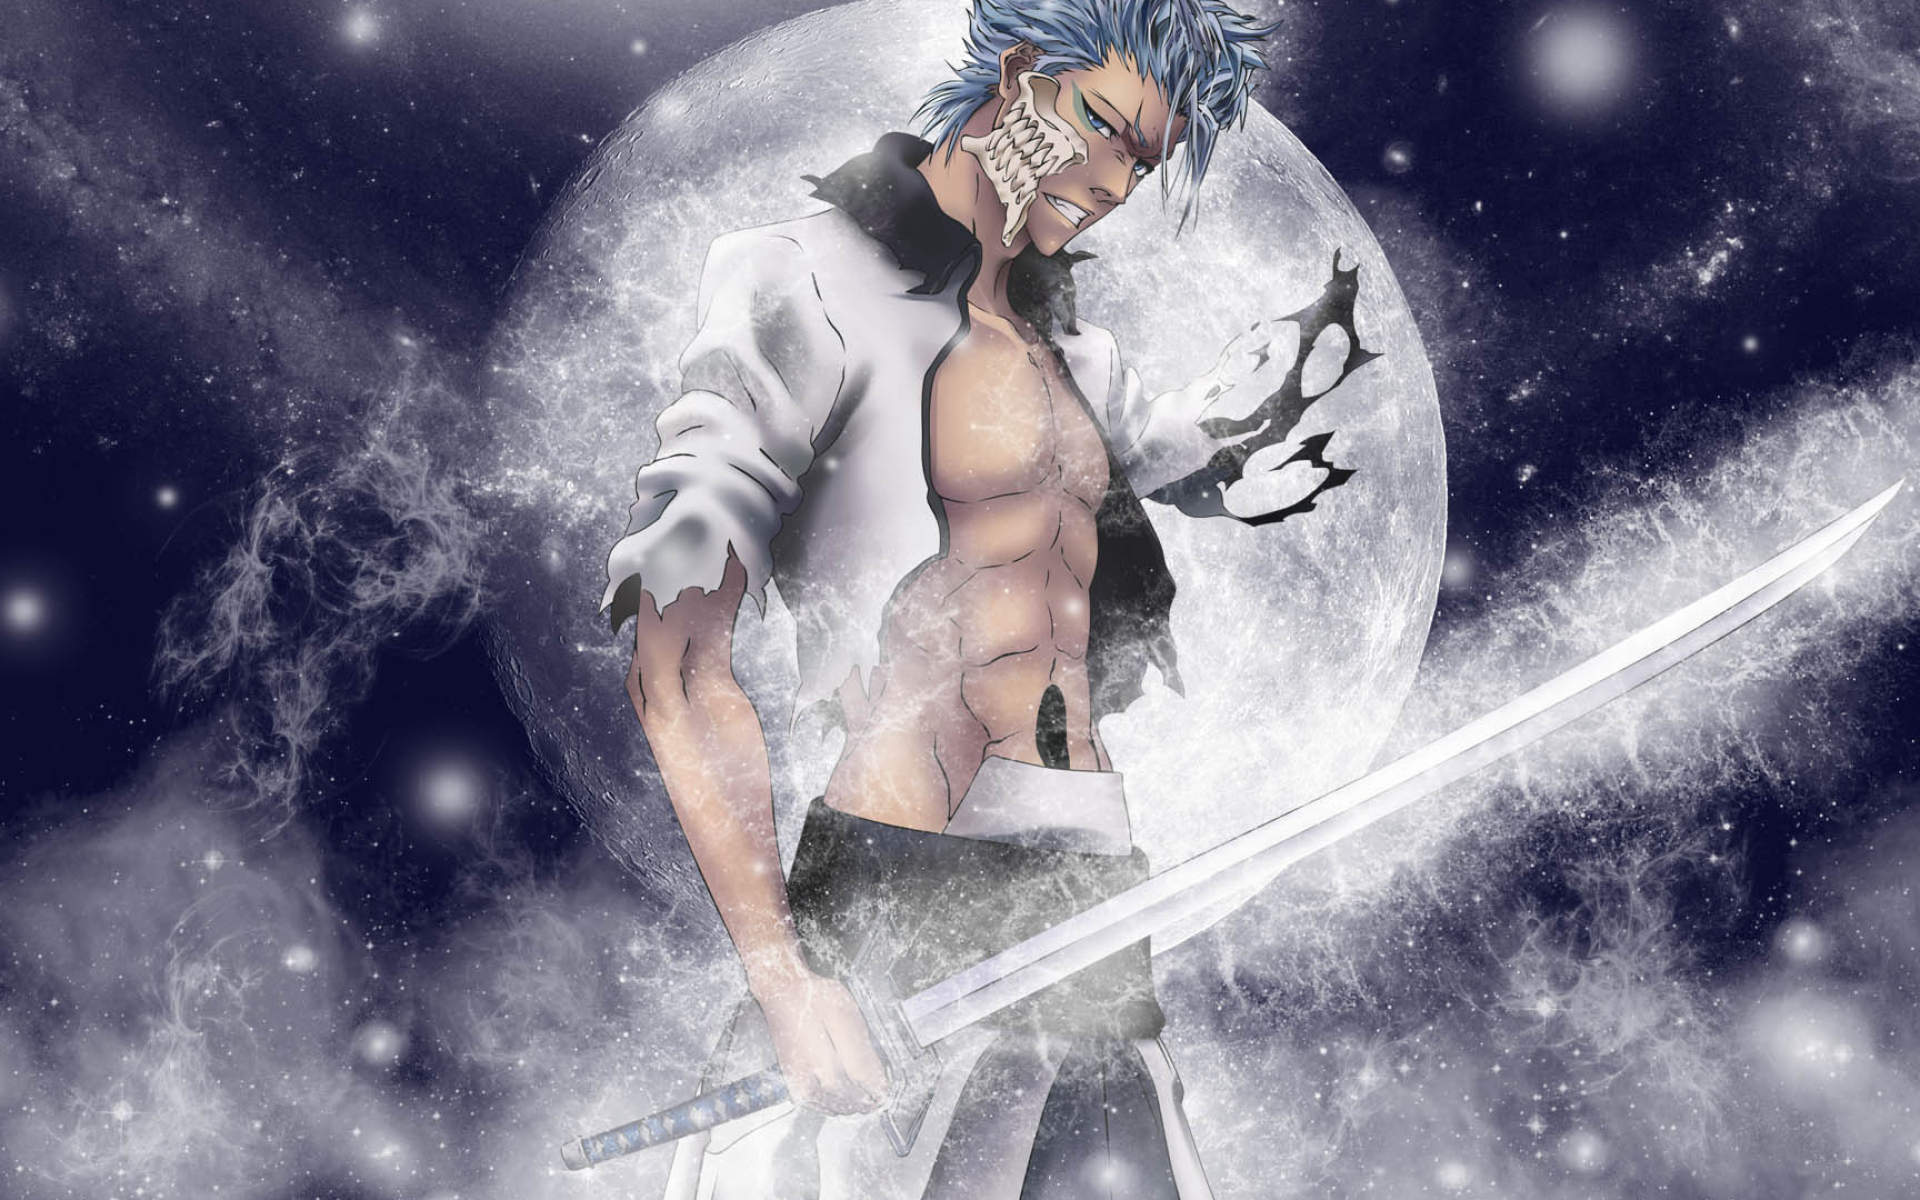 Grimmjow Jaggerjack: The fourth most popular character in the most recent Bleach popularity poll. 1920x1200 HD Wallpaper.